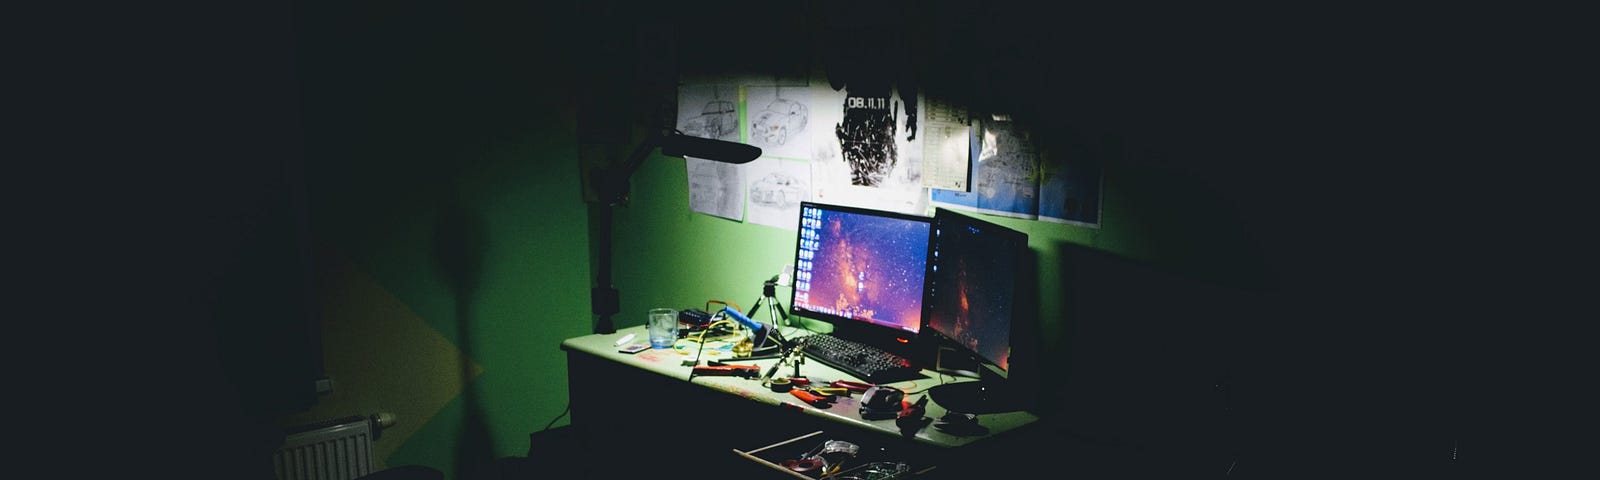 an image of two computer monitors on a desk to represent a hacker’s work station where they might conduct data breaches.